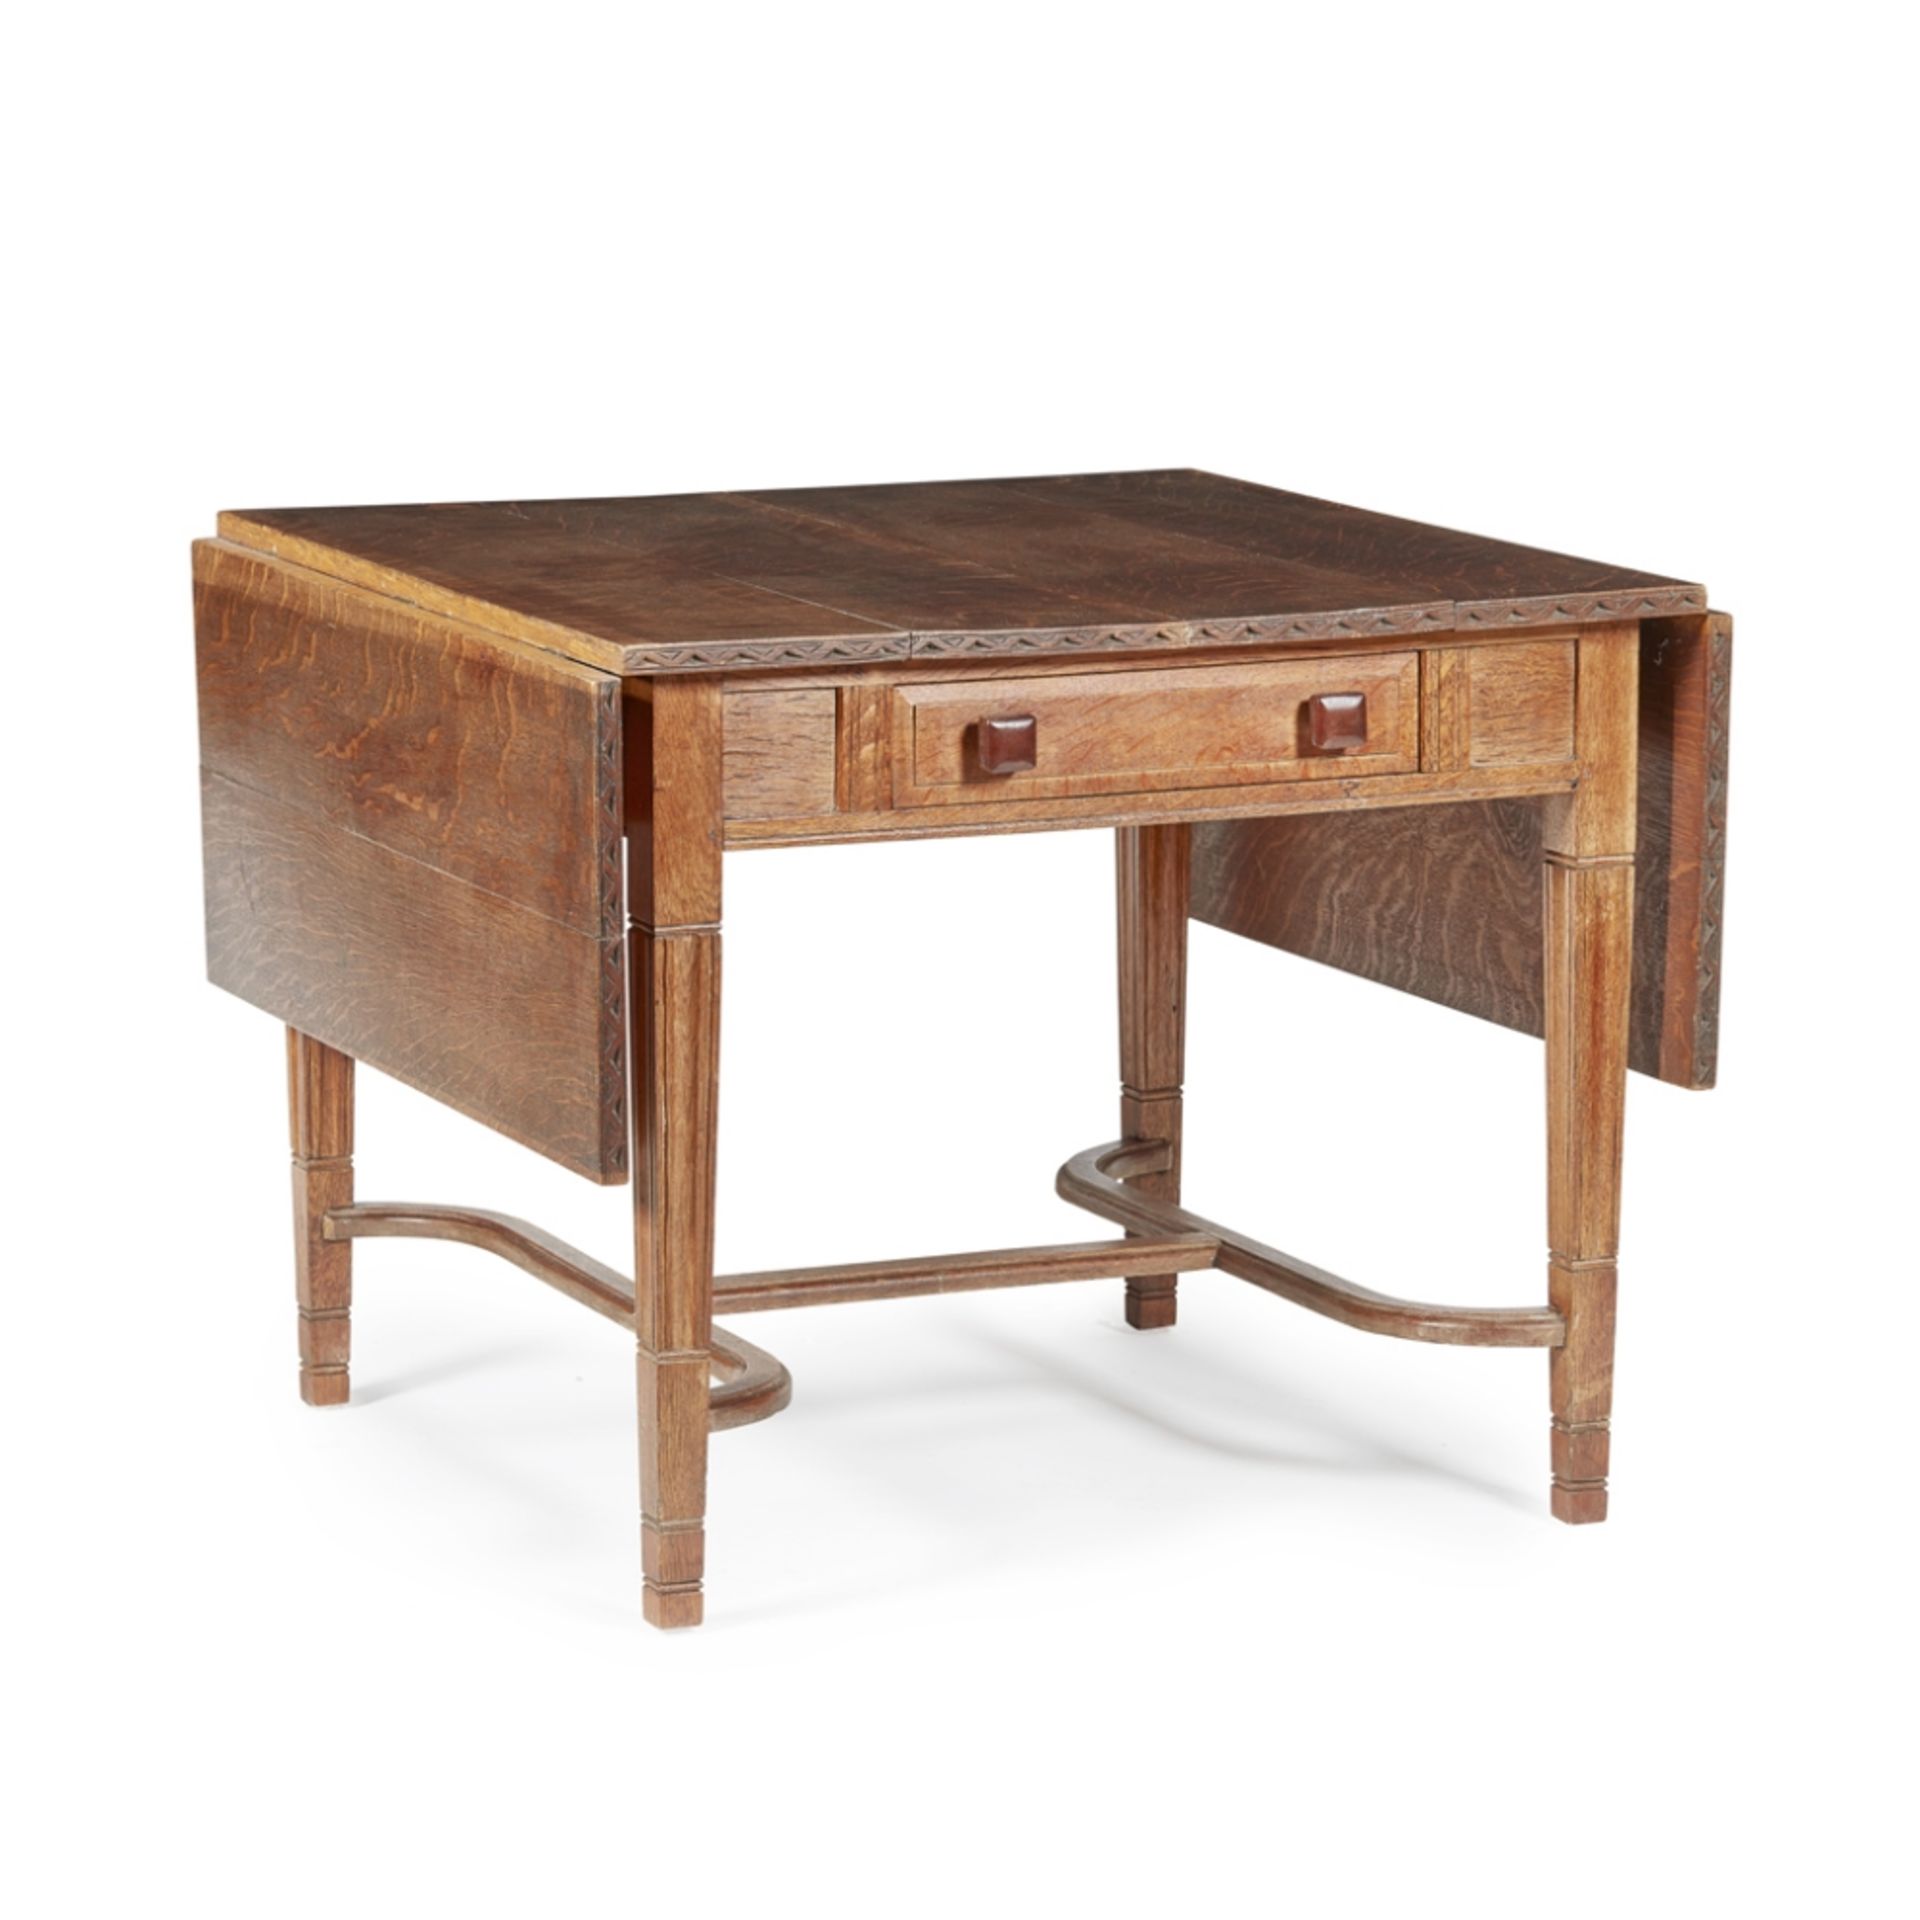 HARRY GREEN ARTS & CRAFTS OAK DROP-LEAF TABLE, DATED 1926 with opposing drawers with square-set